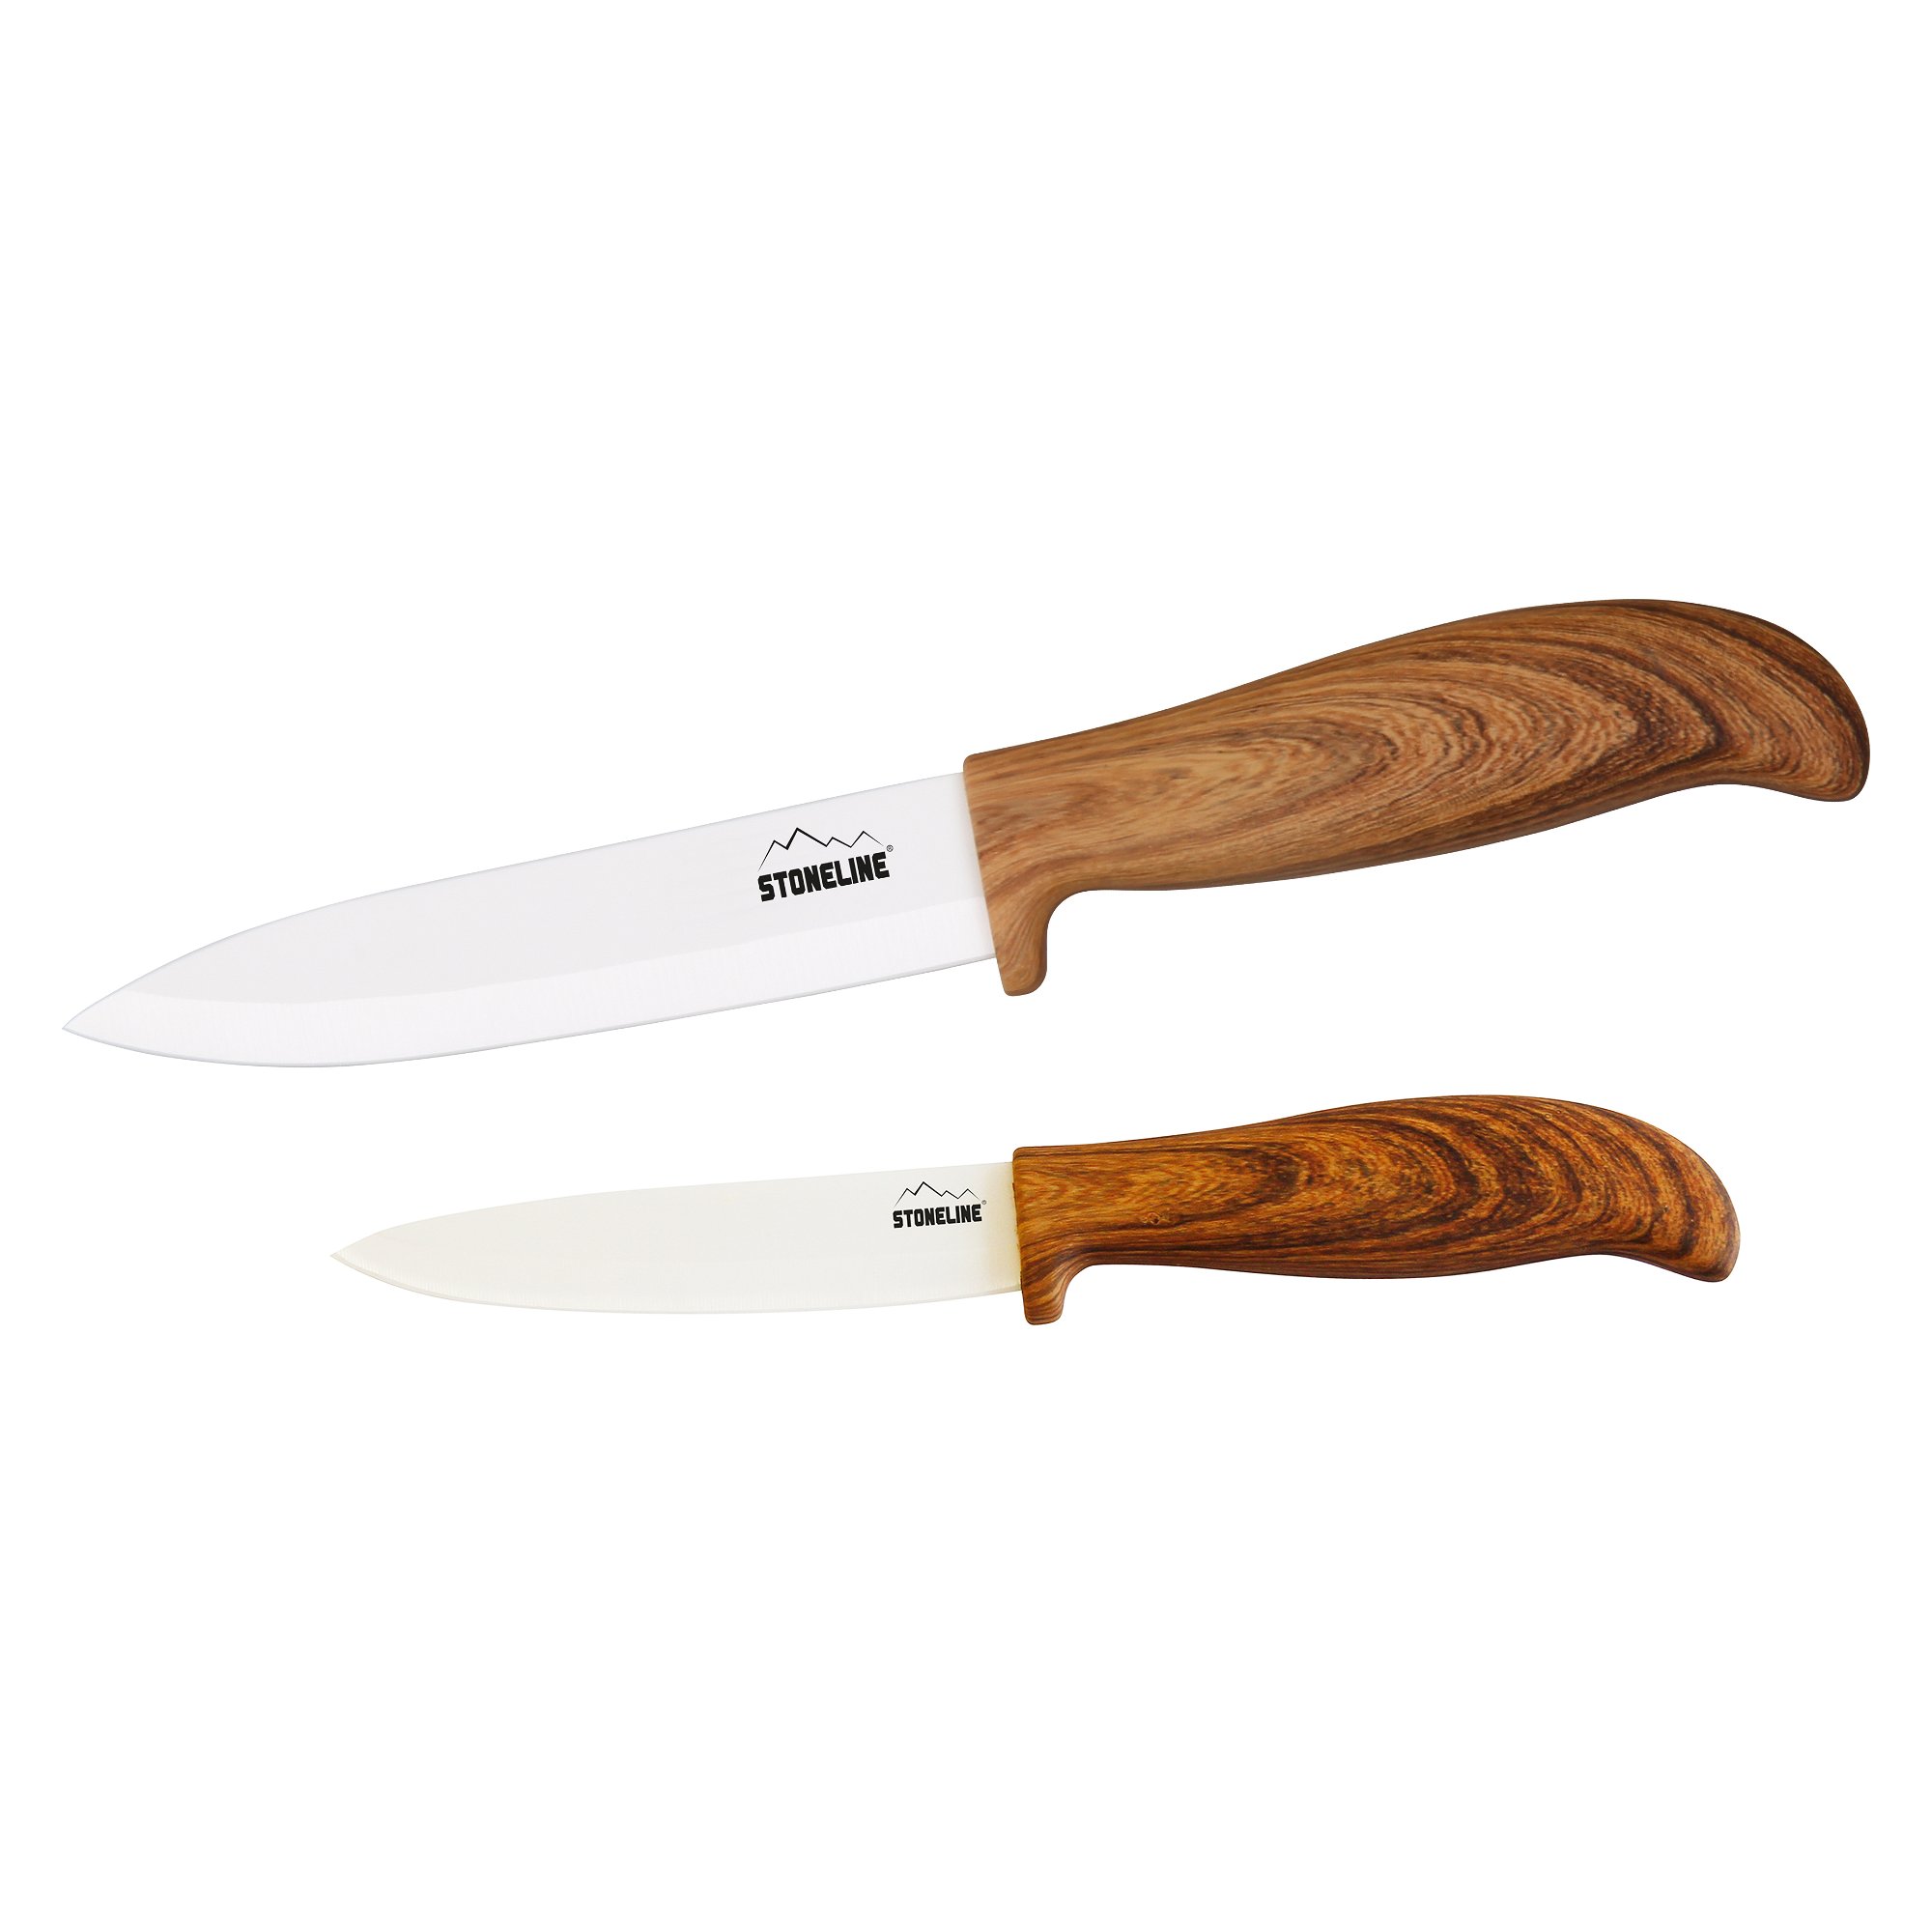 STONELINE® 2 pc CERAMIC Knives Set 21/28 cm, with Safety Sheath | Back to Nature